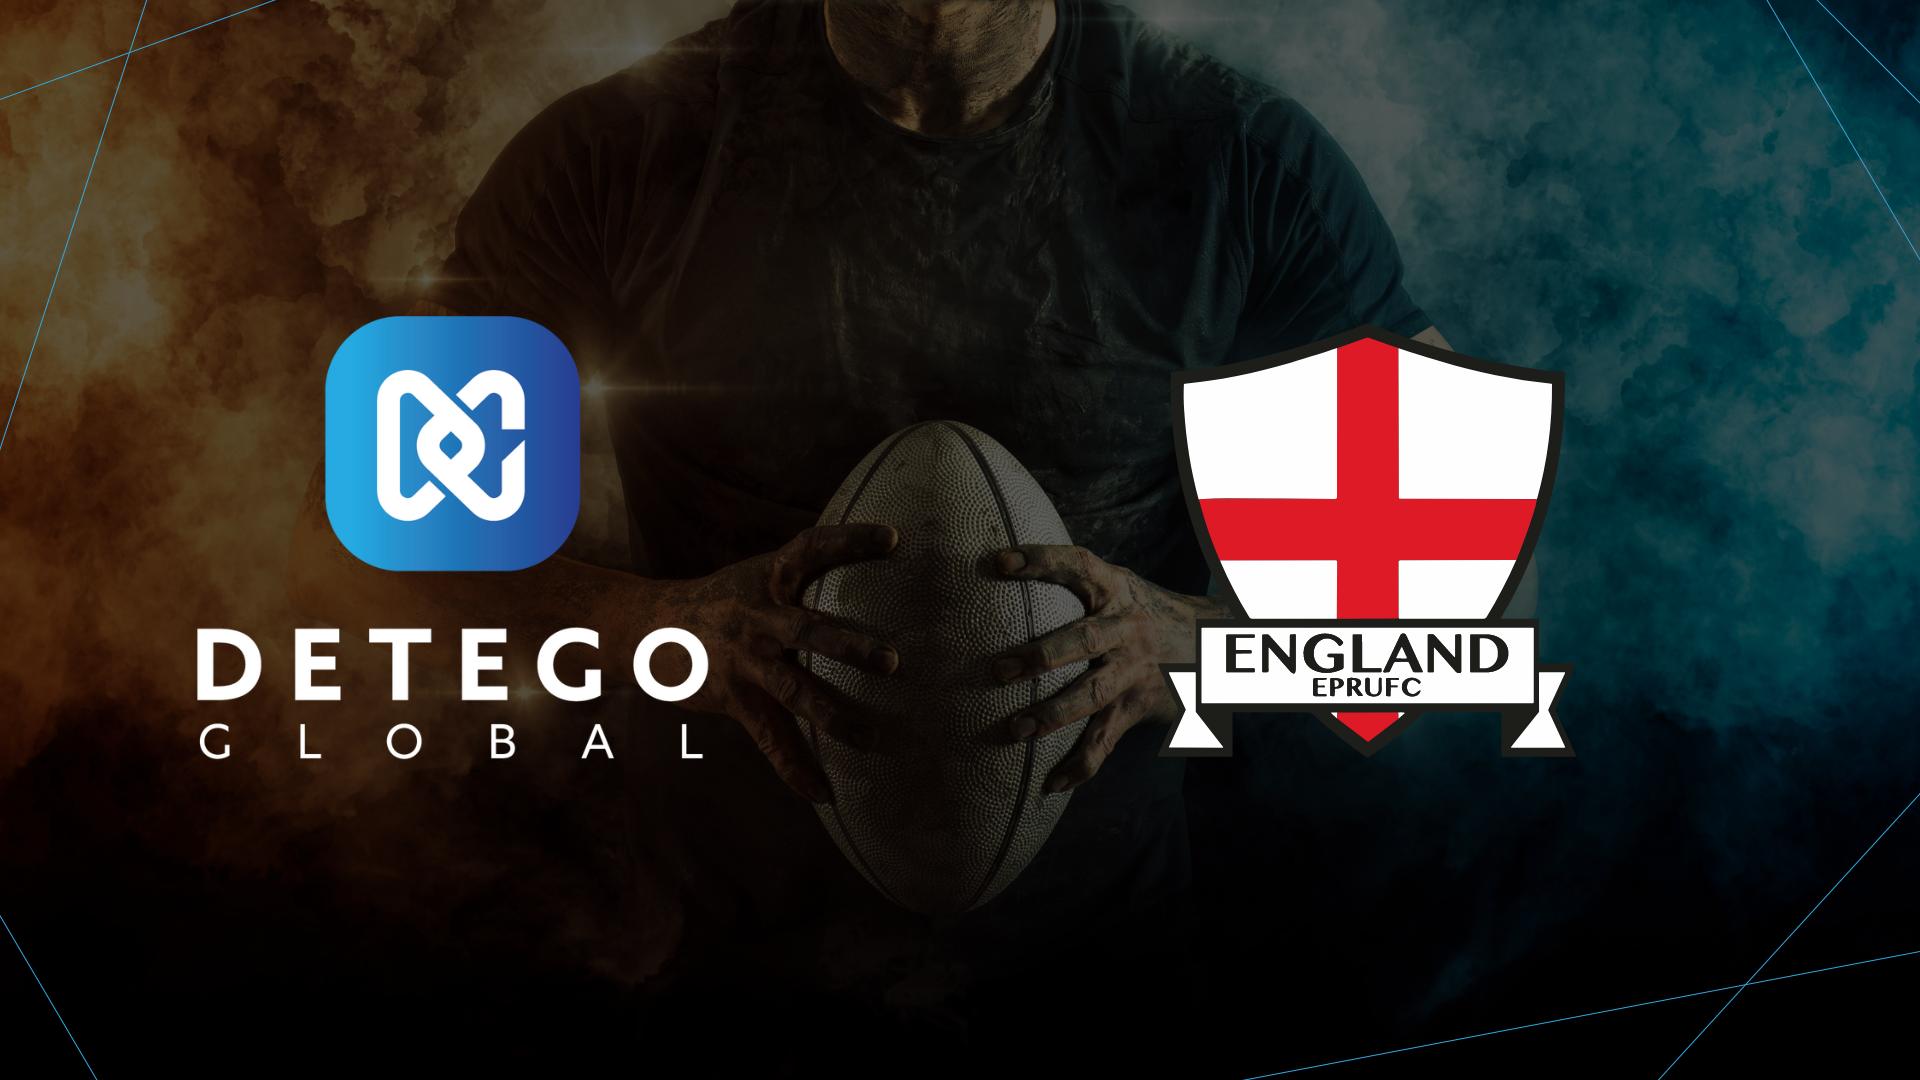 Cutting-Edge Technology and Rugby Spirit Unite as Detego Global Sponsors England Police Rugby Union’s Tour of South Africa